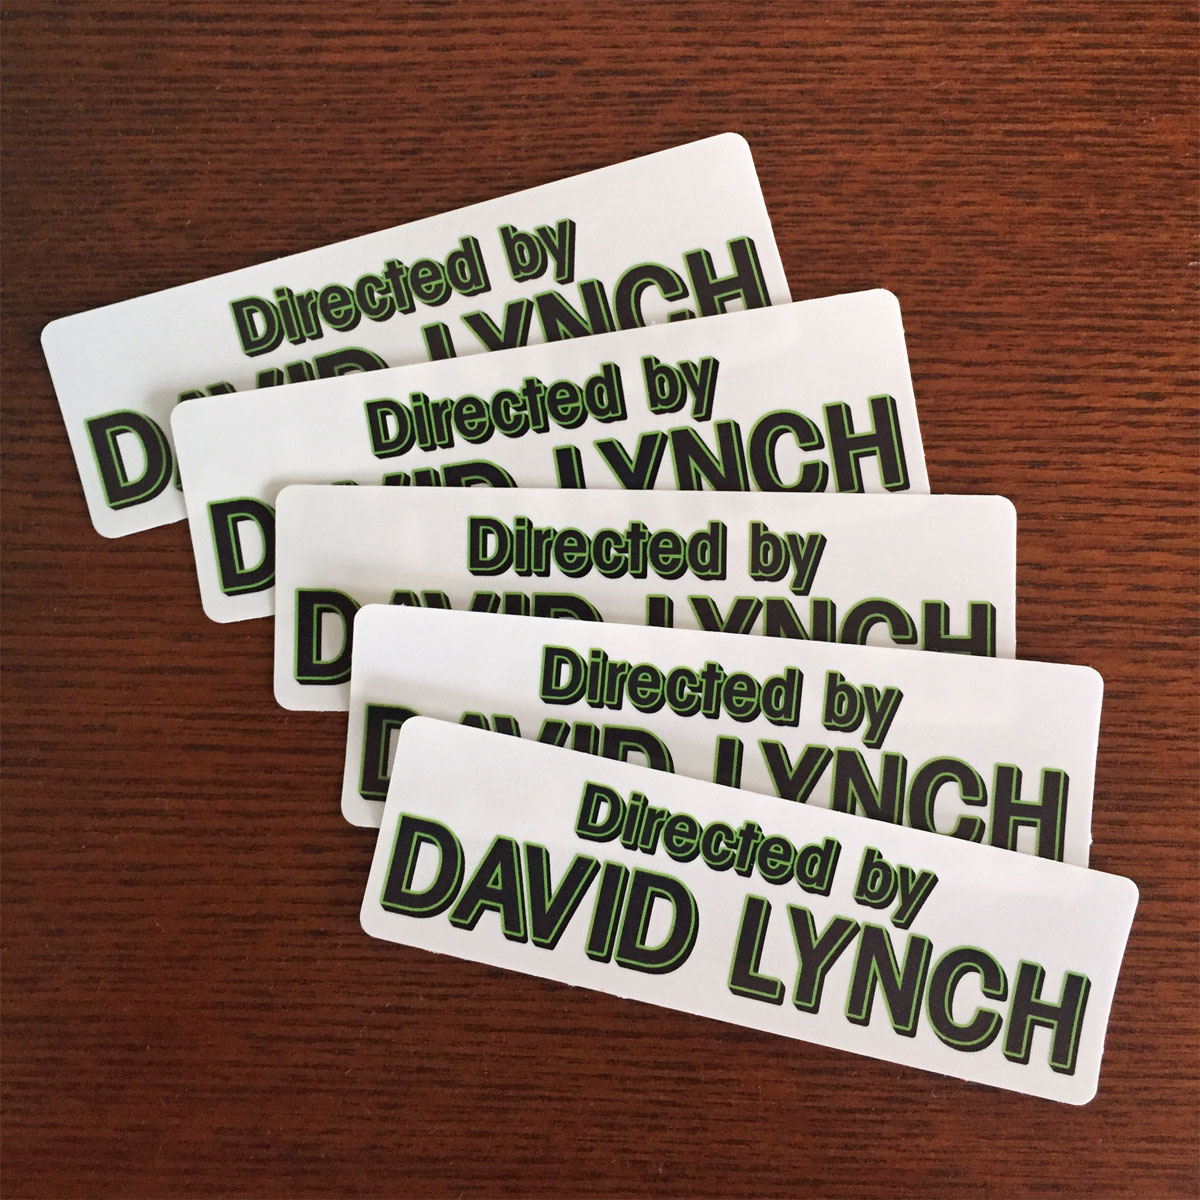 Directed by David Lynch sticker pack